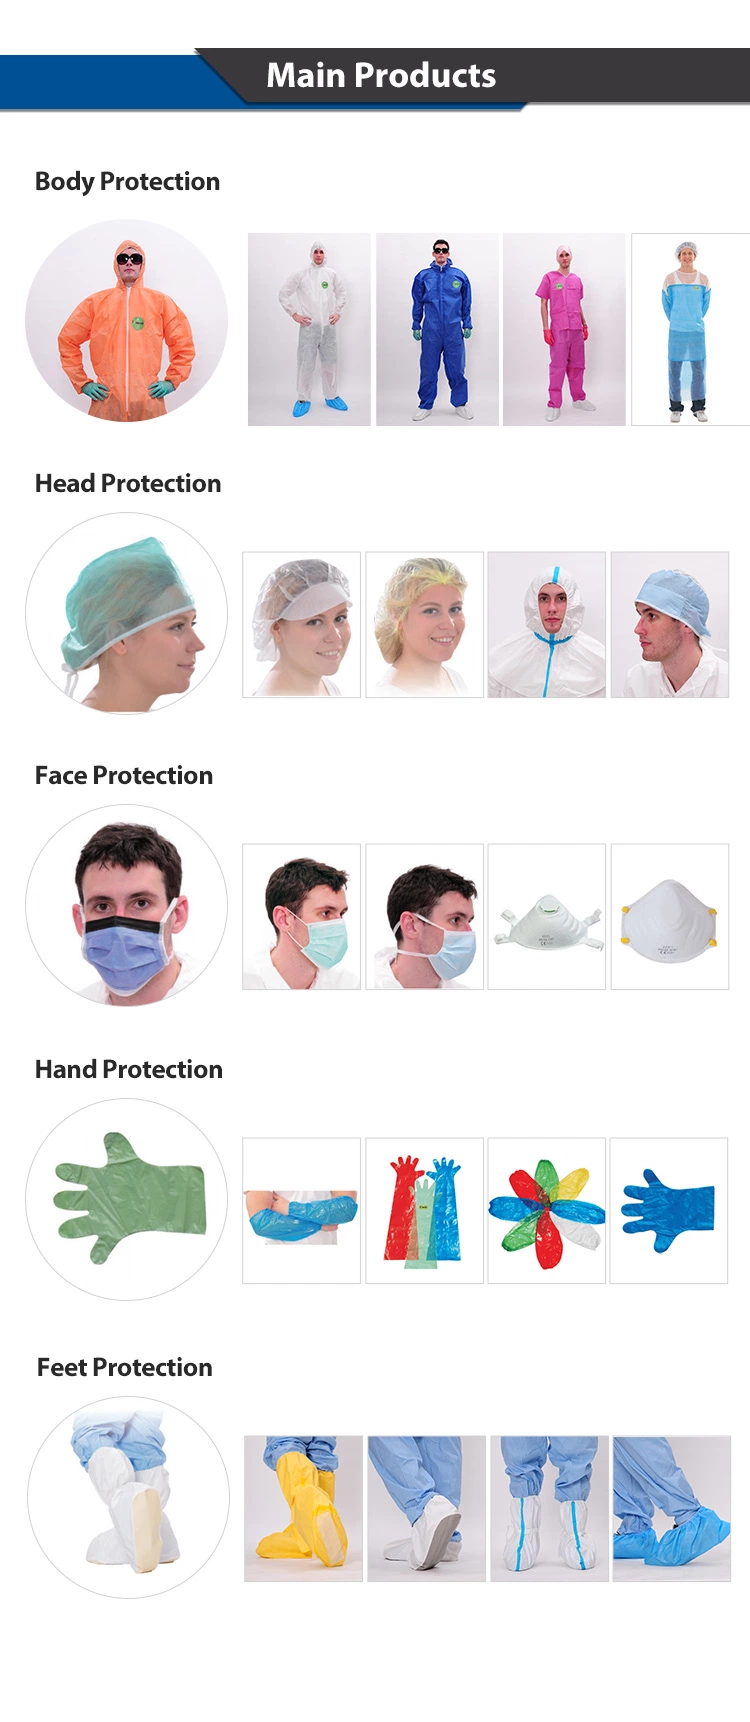 Raygard 11032 Non-Woven Disposable 3ply Tie-on Face Mask in High Quality Bfe99%